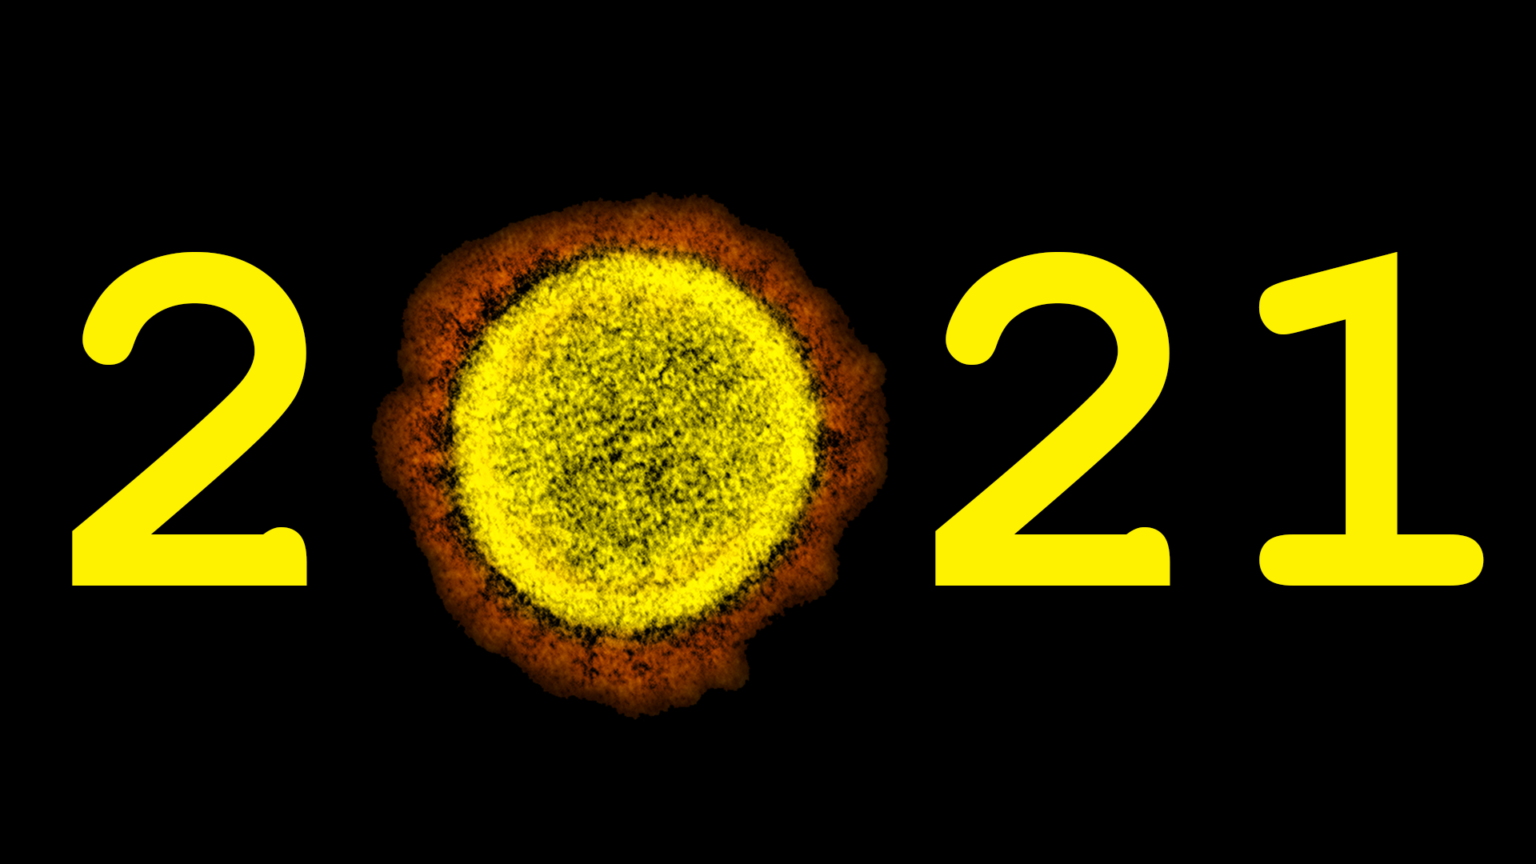 An illustration in which a transmission electron micrograph of a SARS-CoV-2 virus particle takes the place of 0 in 2021